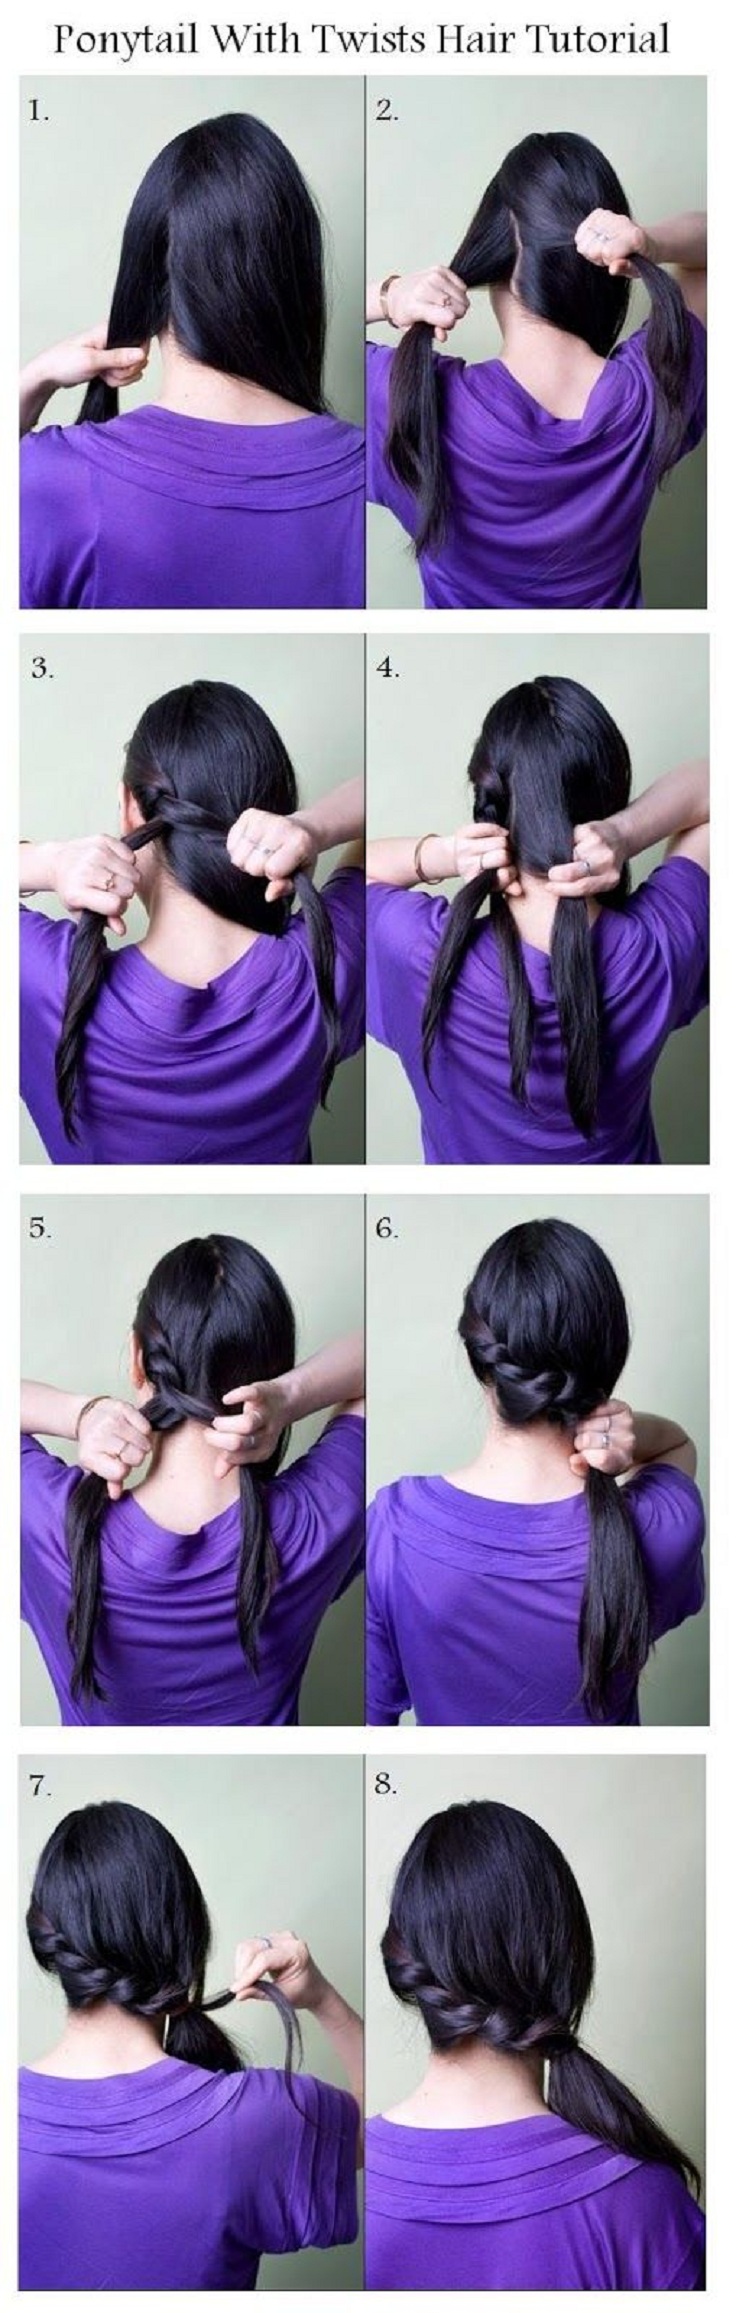 The braided bangs - 15 ways to make cute ponytails